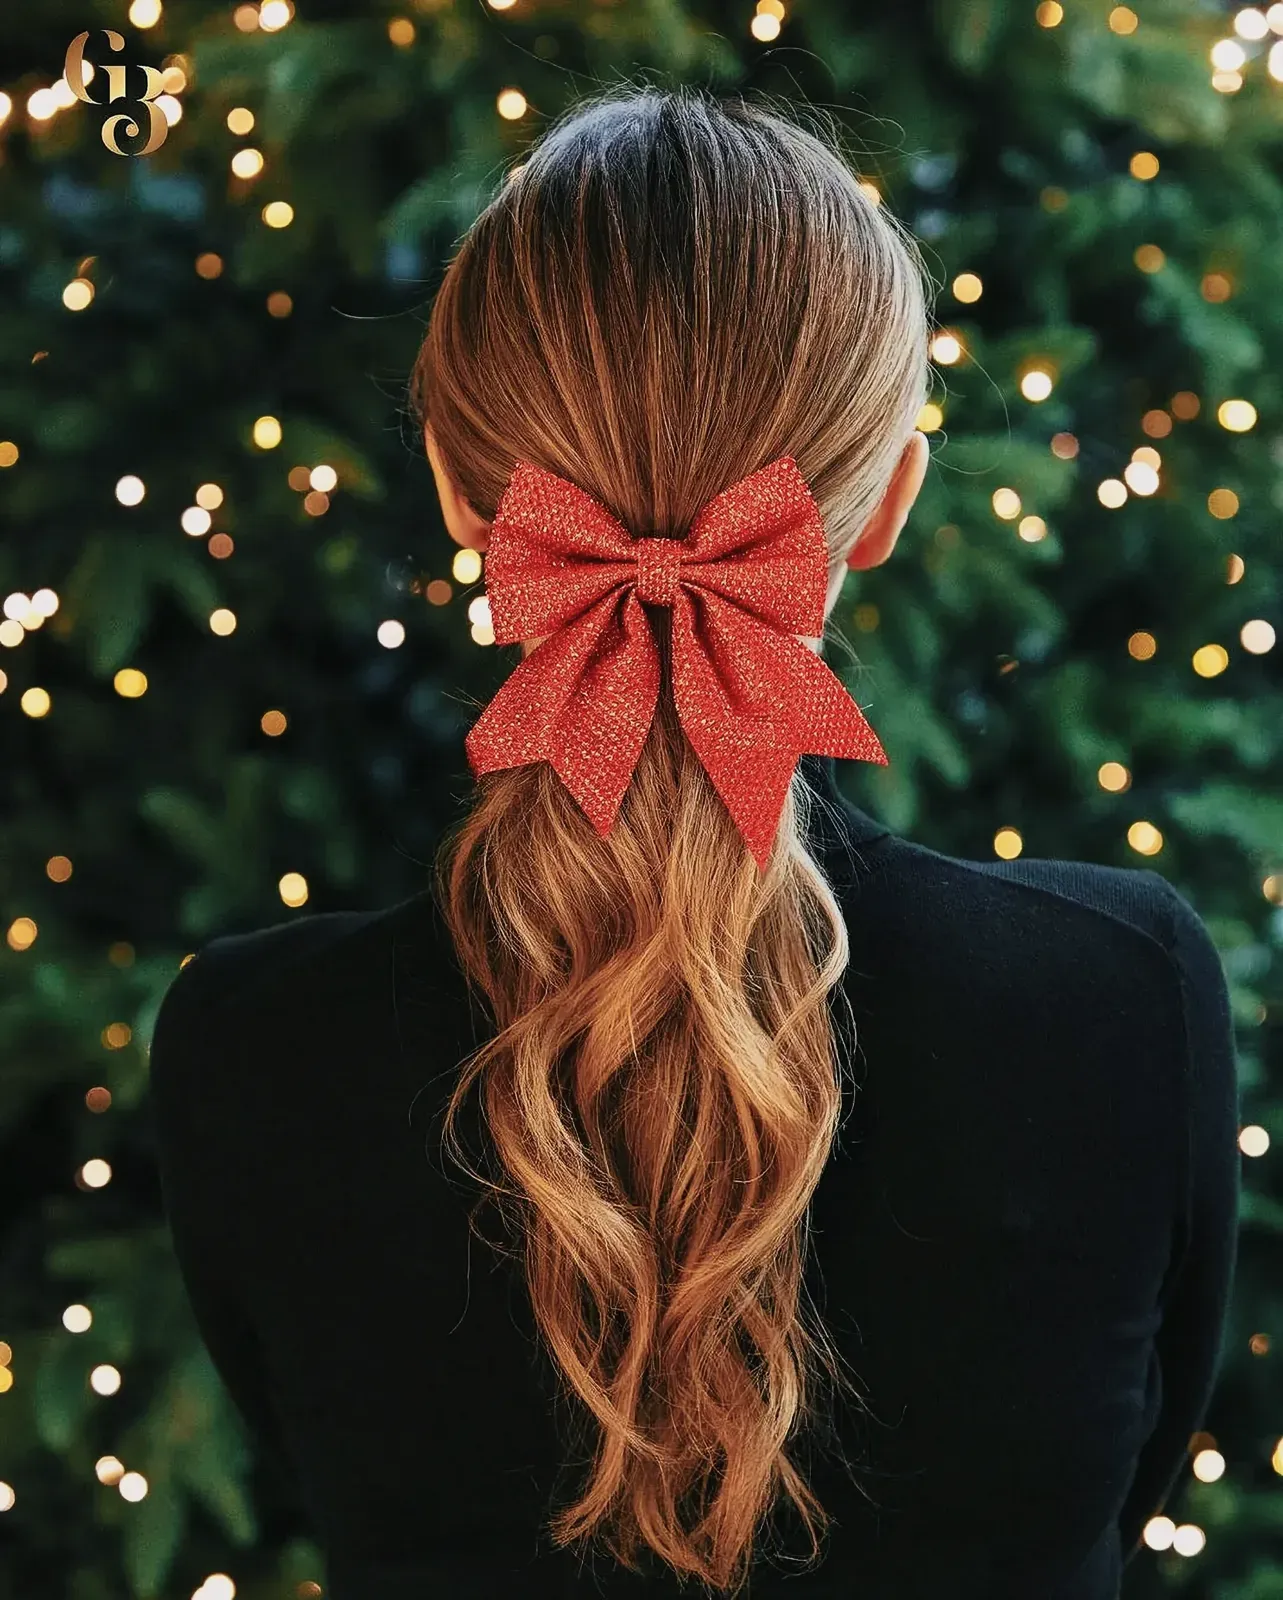 Woman with festive red bow in her hair standing near a decorated Christmas tree